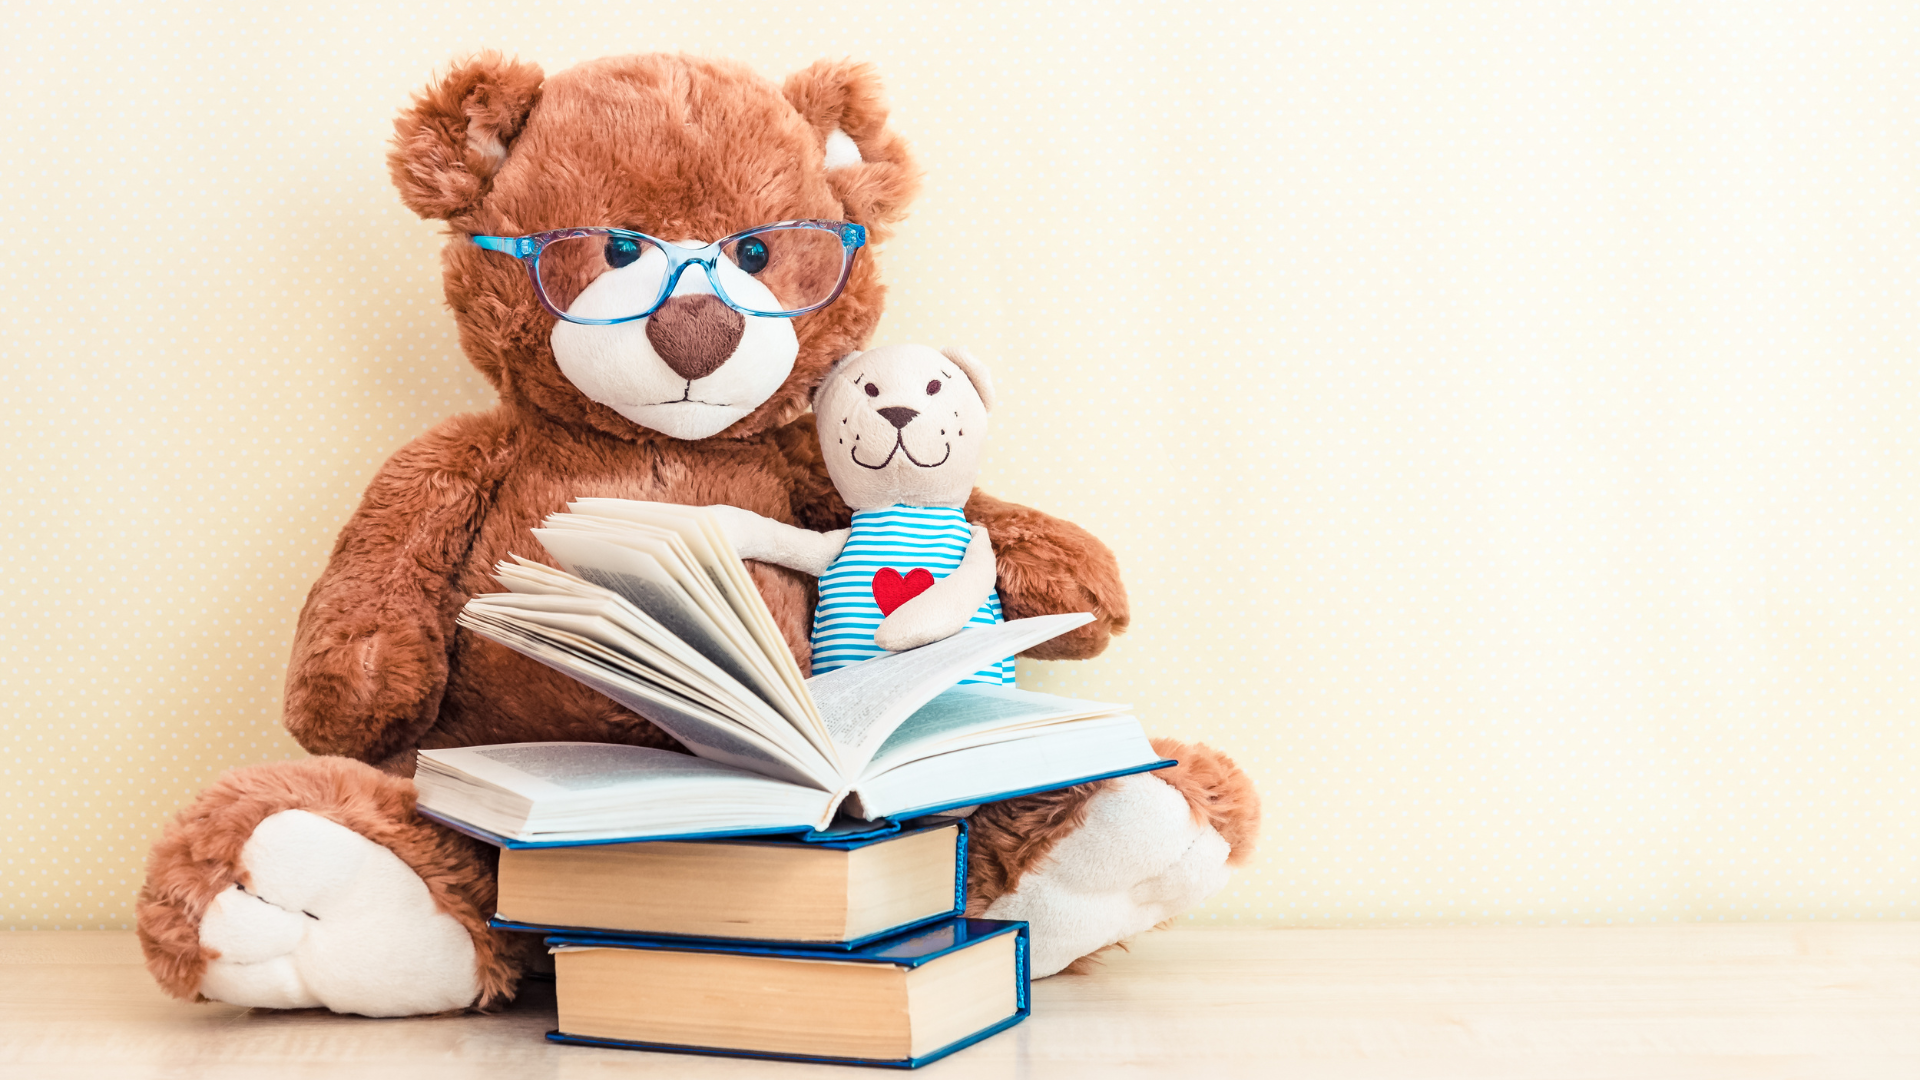 A brown stuffed bear wearing glasses sits with a stack of books, the one on top opened, and a smaller cream-colored stuffed bear on its lap.